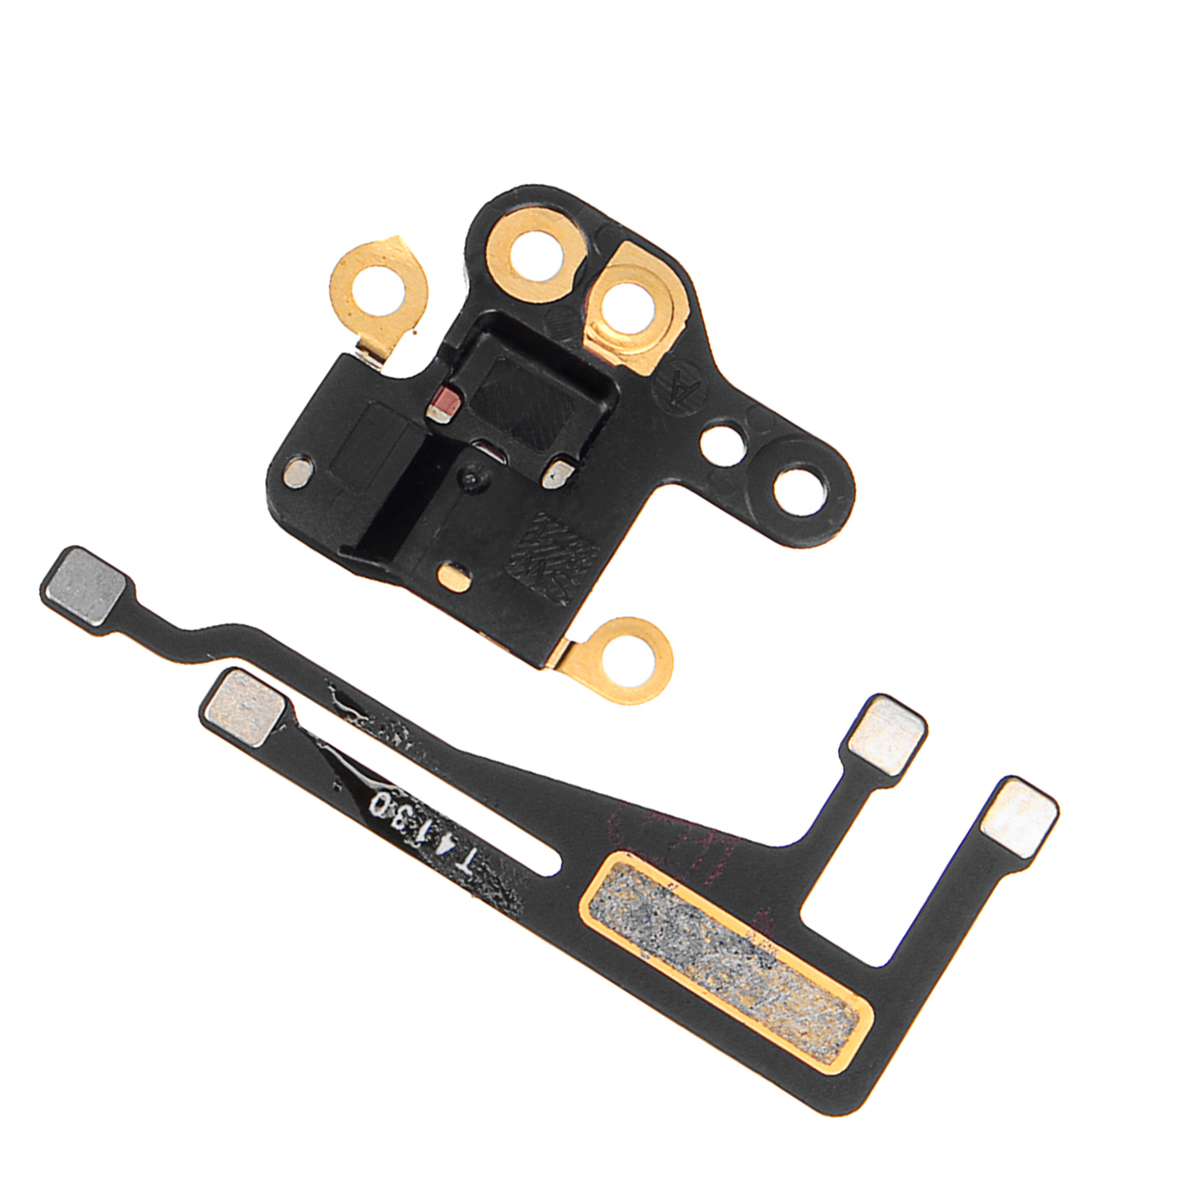 

Wifi Signal Antenna Flex Cable Ribbon Replacement for iPhone 6 4.7"